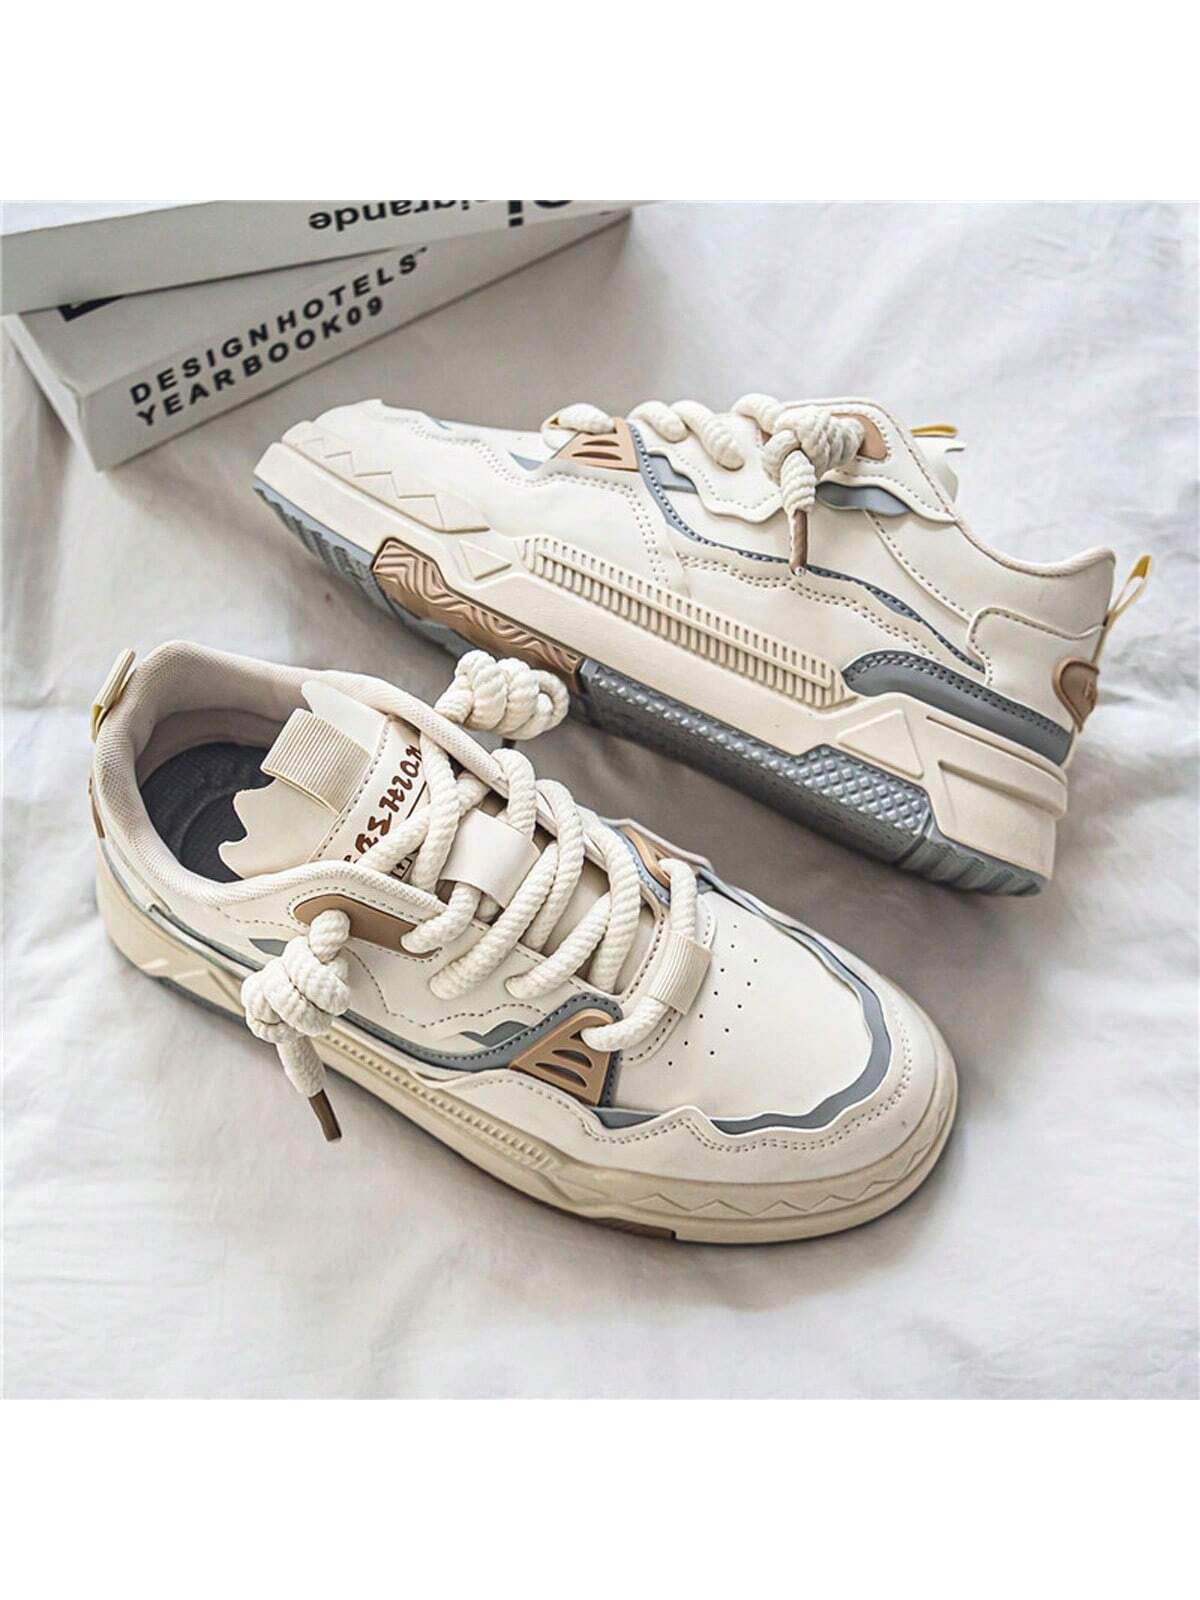 New Korean Style Fashionable Low Top Sneakers for Men